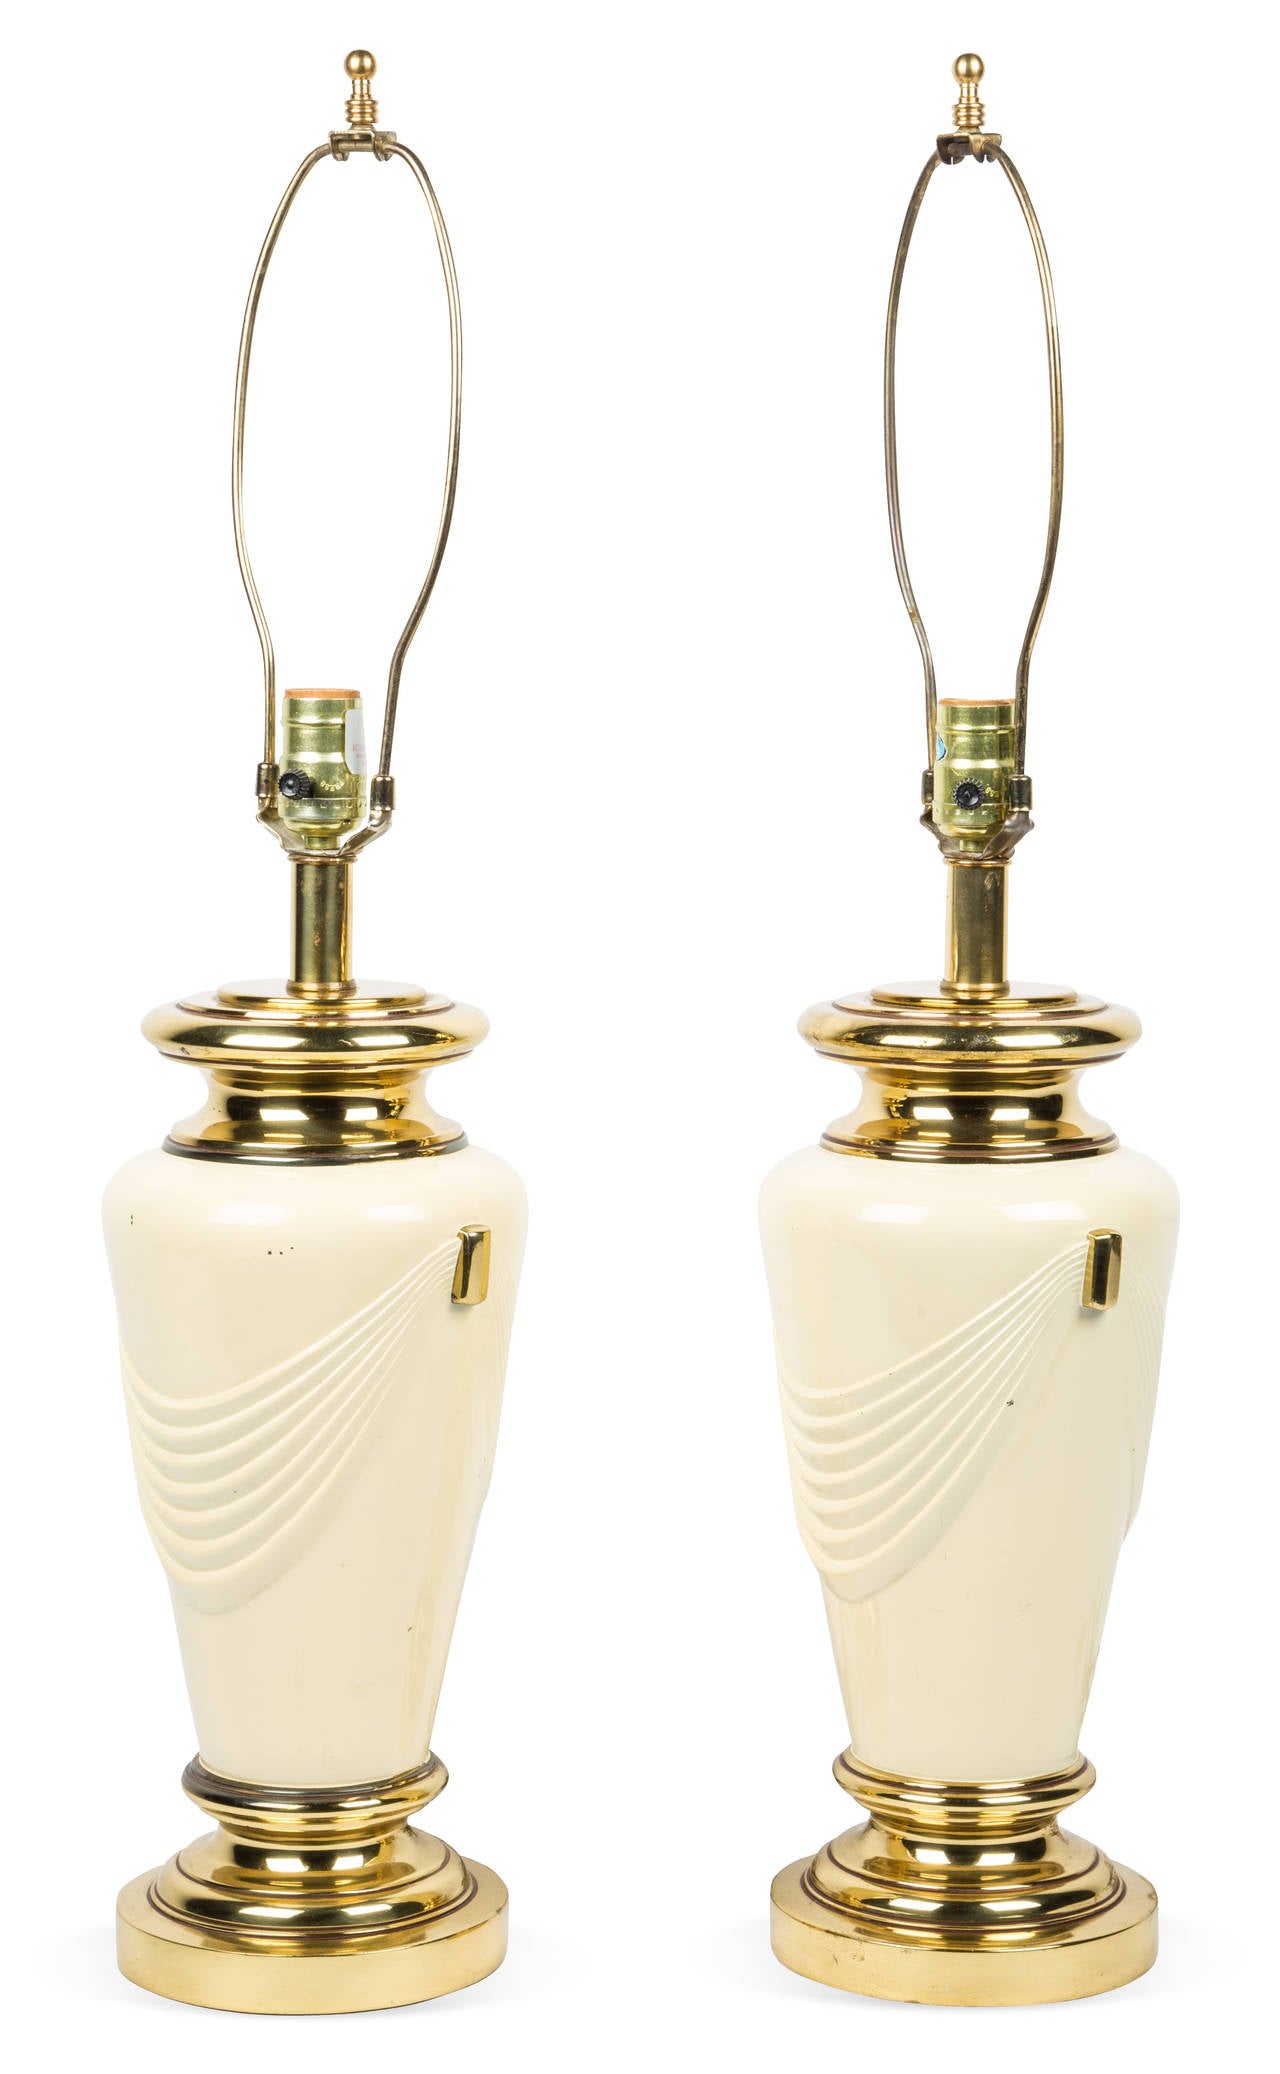 Pair of Neoclassical style brass table lamps with dimensional drape design. Base features brass details with cream gloss painted finish. Standard bulb. Original wiring in working condition. Harps and finials included.